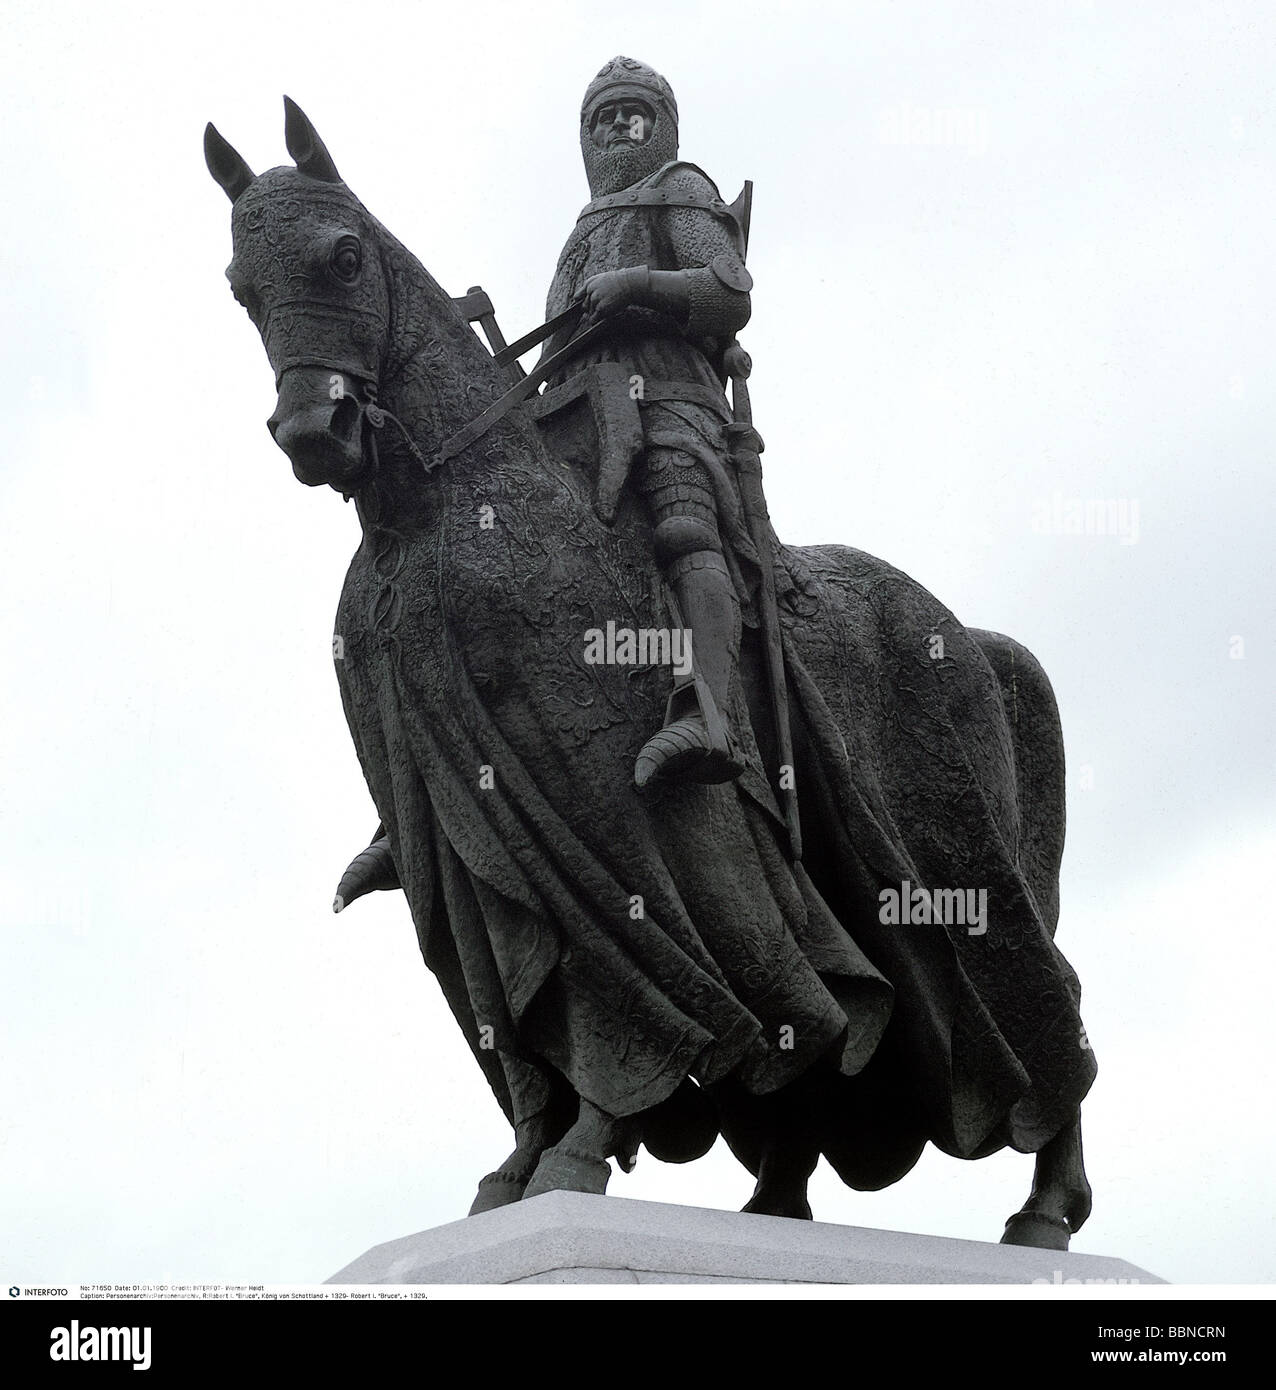 Robert I. 'the Bruce', 11.7.1274 - 7.6.1329, King of Scotland 1306 - 1329, equestrian statue, erected on the occasion of the 650th anniversary of the Battle of Bannockburn (23./24.6.1314), 1964, Stock Photo